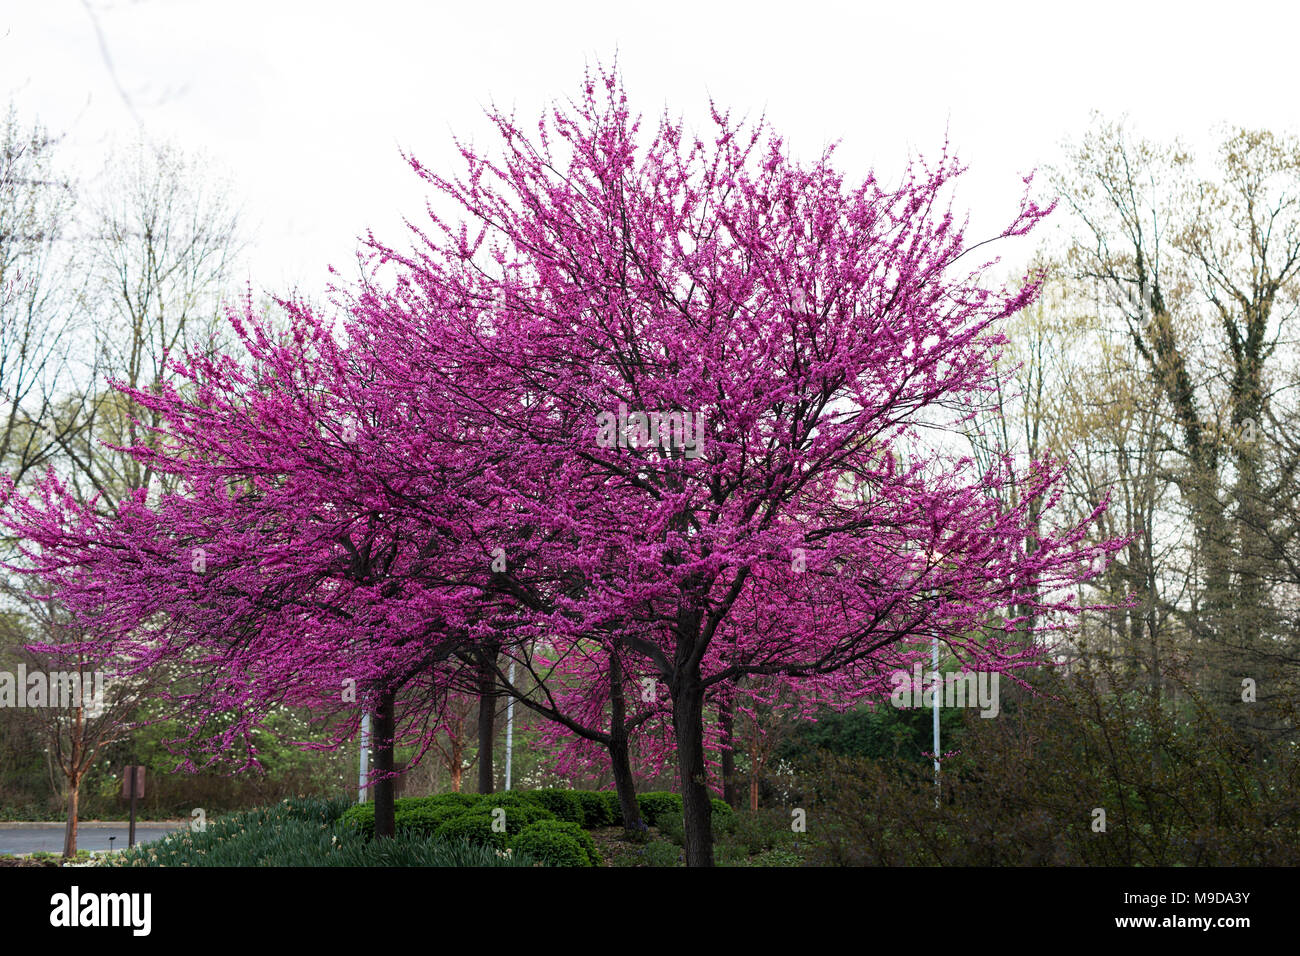 Eastern redbud trees (Cercis canadensis) blooming in the spring in Indianapolis, Indiana, USA. Stock Photo